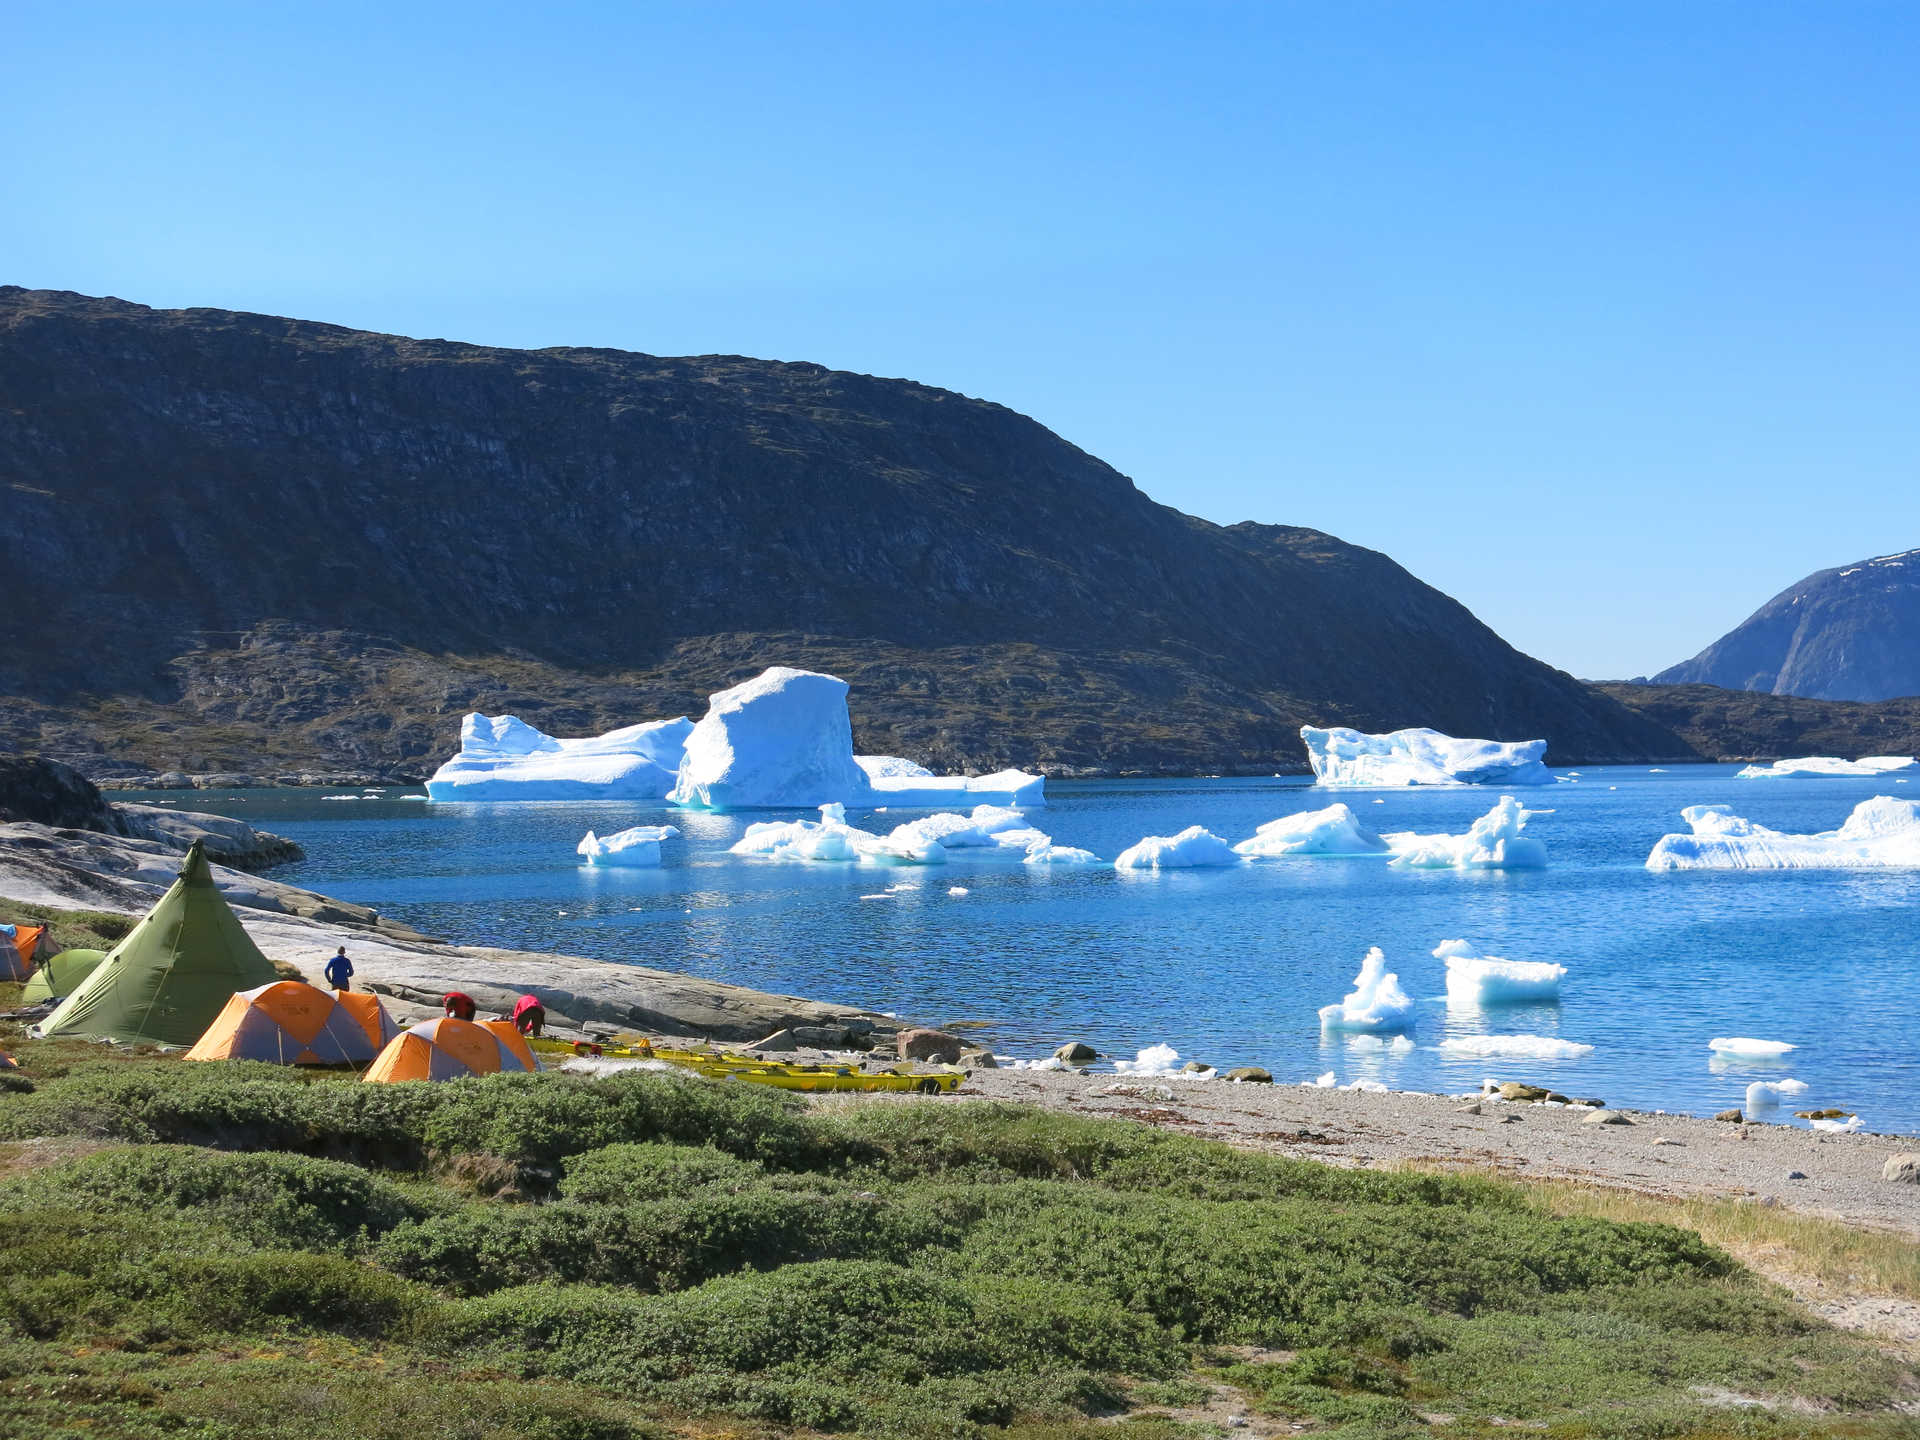 Camp on the coast of Greenland in front of icebergs